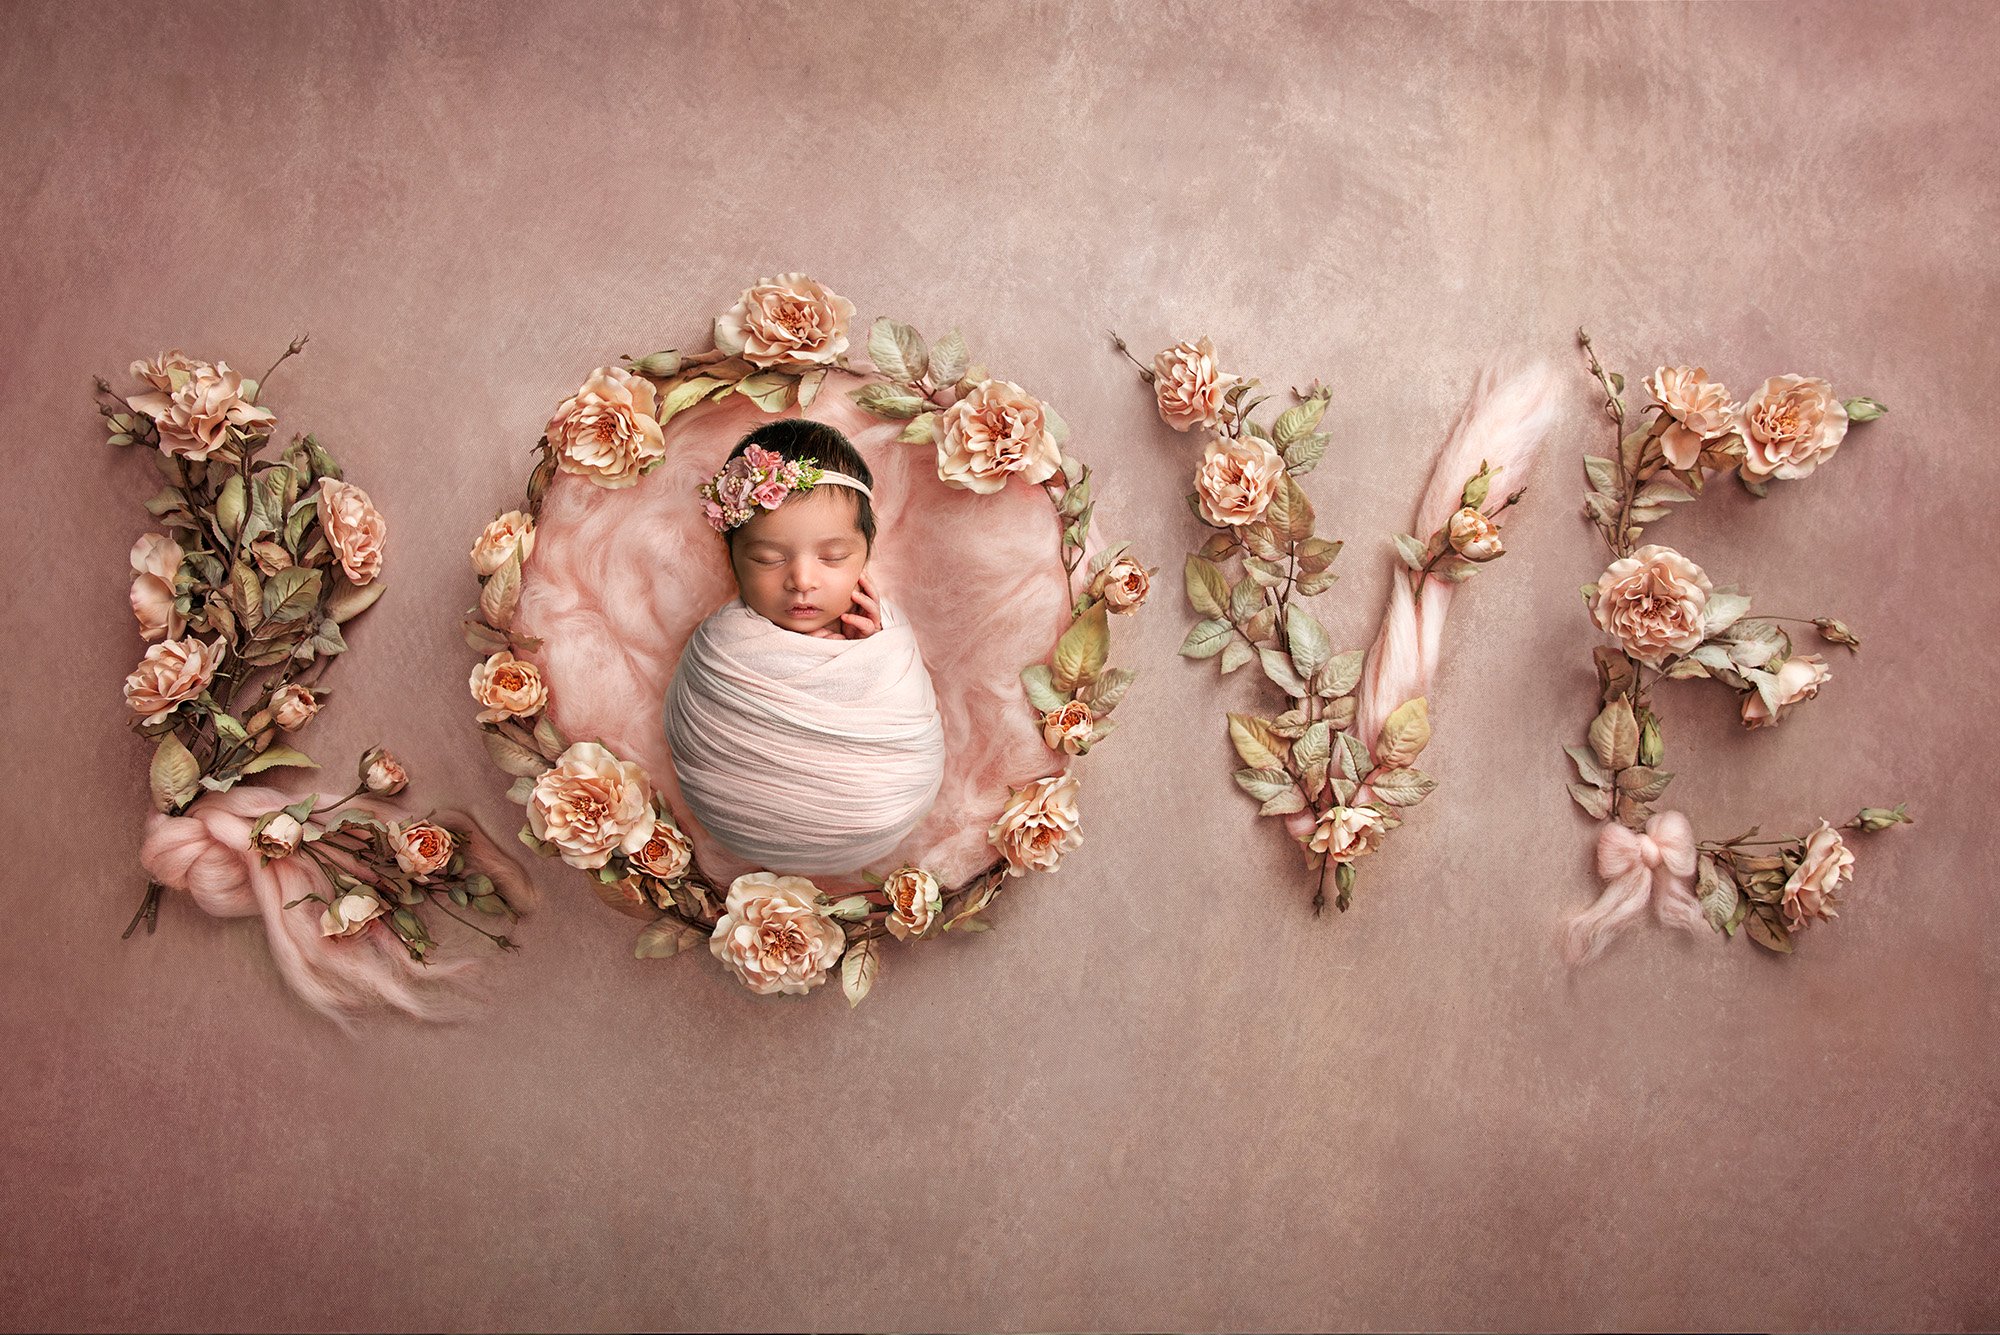 Professional Maternity Newborn Photographer newborn baby girl asleep on a pink background spelling out the word LOVE in flowers